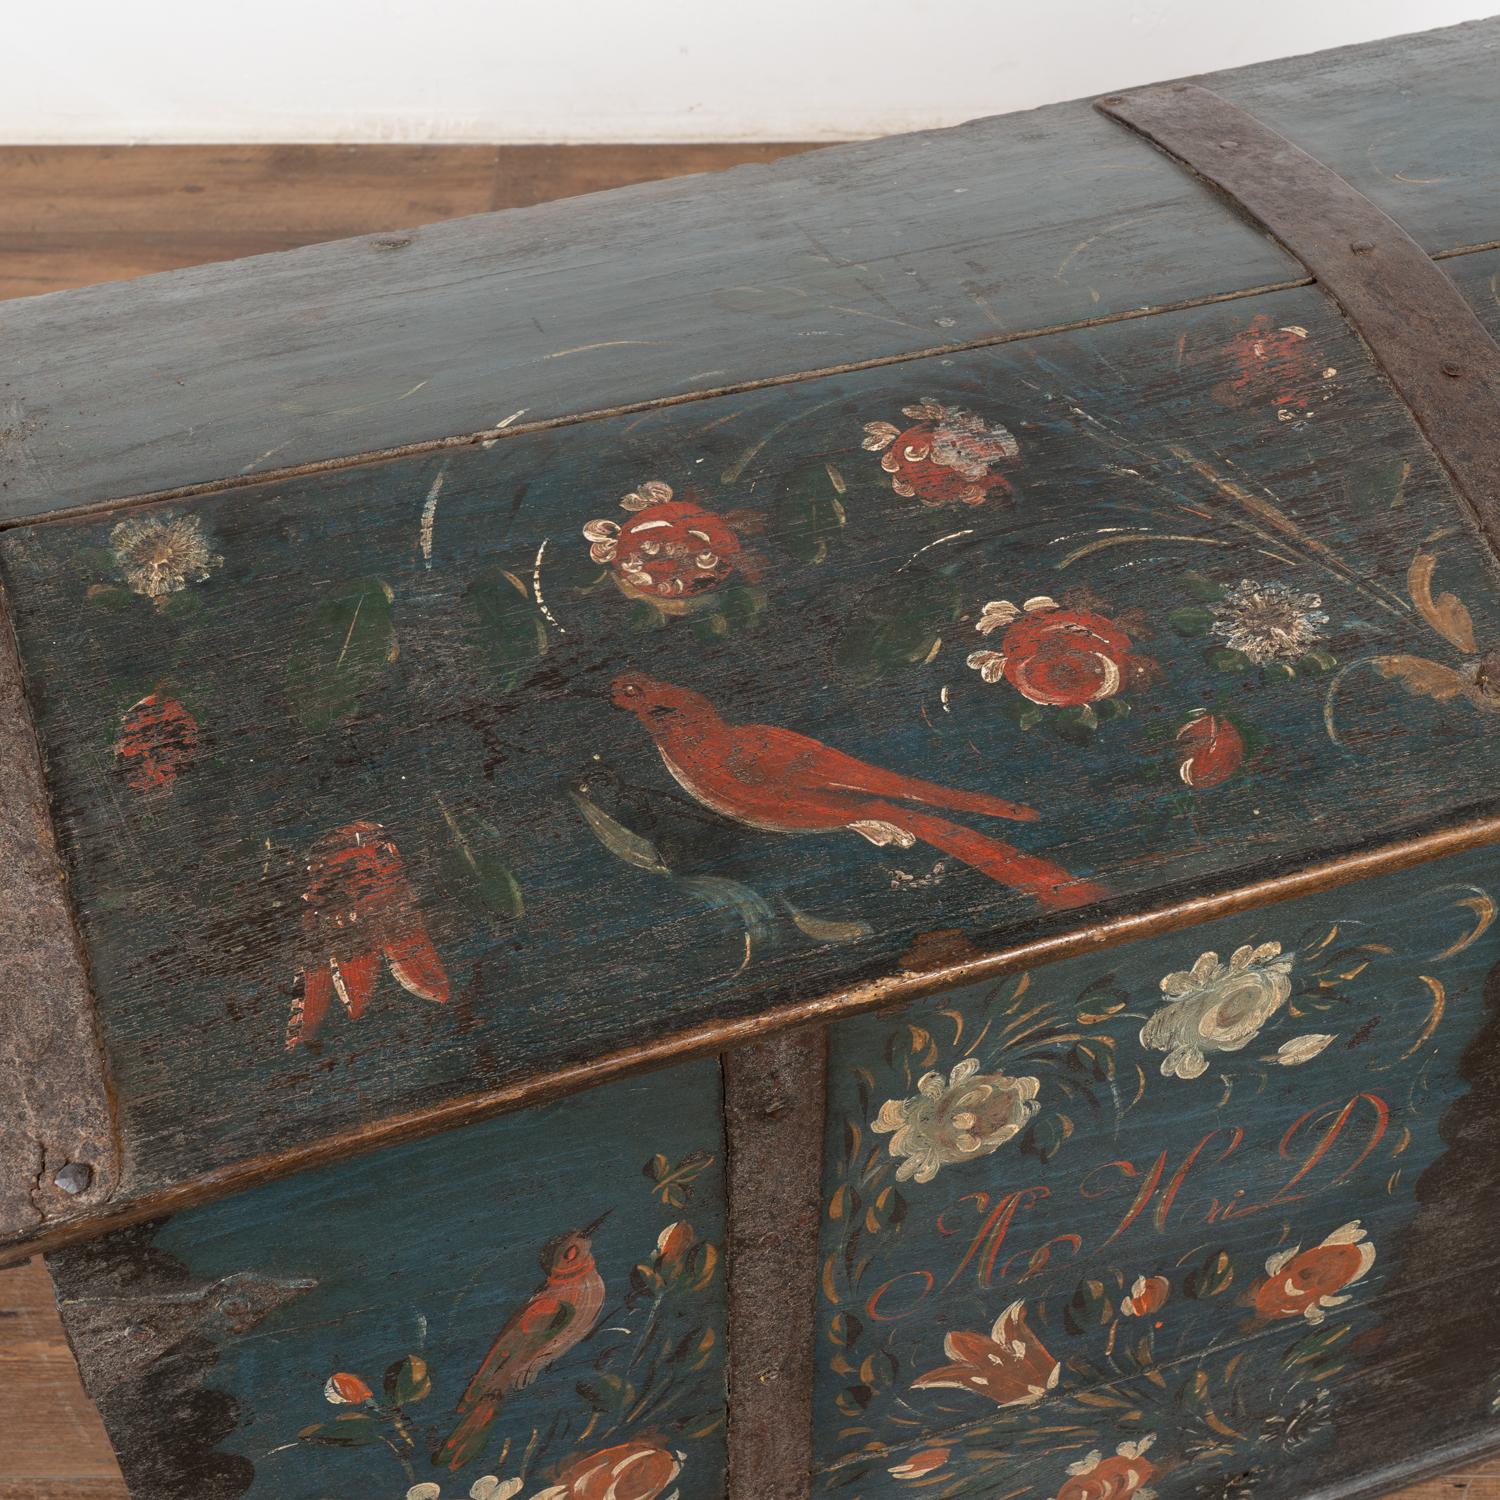 Original Painted Blue Dome Top Trunk with Birds and Flowers, Sweden dated 1841 In Good Condition For Sale In Round Top, TX